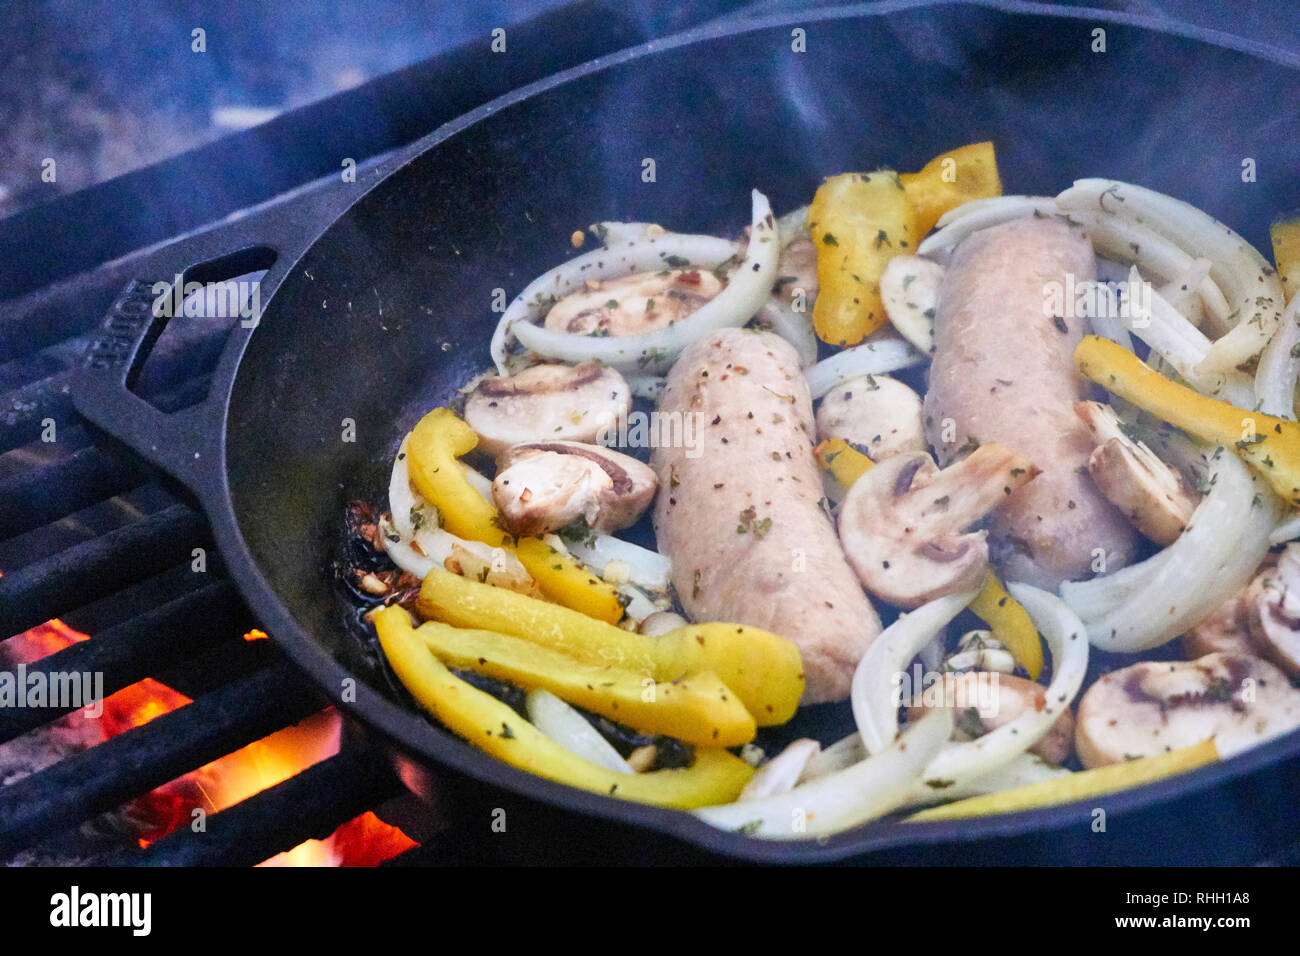 https://c8.alamy.com/comp/RHH1A8/cast-iron-skillet-camping-meal-over-campfire-grill-flames-with-sausage-peppers-mushrooms-and-onions-RHH1A8.jpg